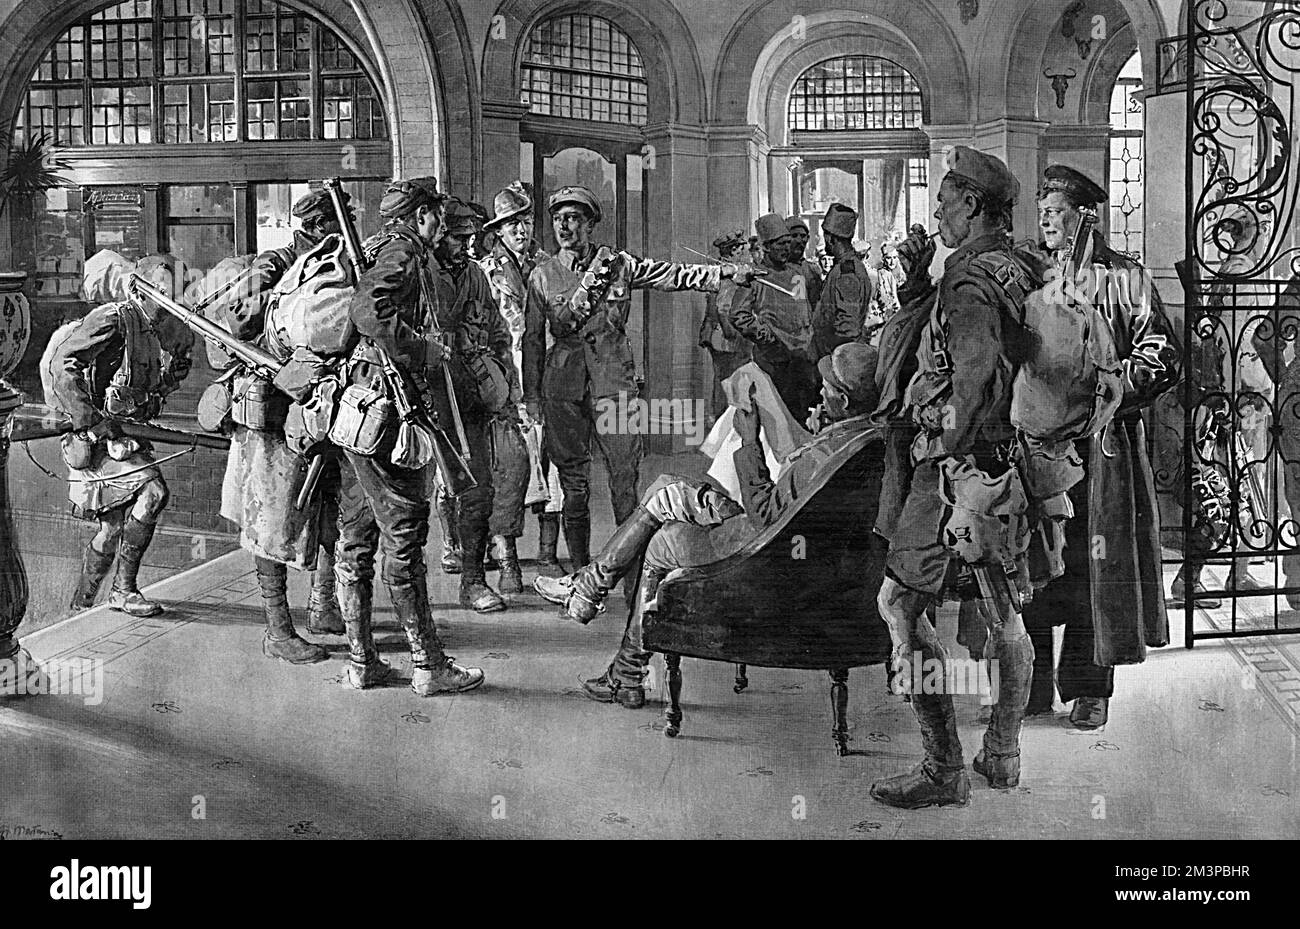 Soldiers and sailors back from the front, arrive in the entrance of hall of the Union Jack Club near Waterloo Station.  The club was funded through public subscription and opened in 1907 by King Edward VII as a club for servicemen home from the front and offered a dining room, smoking room, library, billard room, barber, bathrooms, bedrooms and a temporary address while in London.  The club also welcomed foreign servicemen.  In the background can be seen a group of Russian soldiers.       Date: 1916 Stock Photo